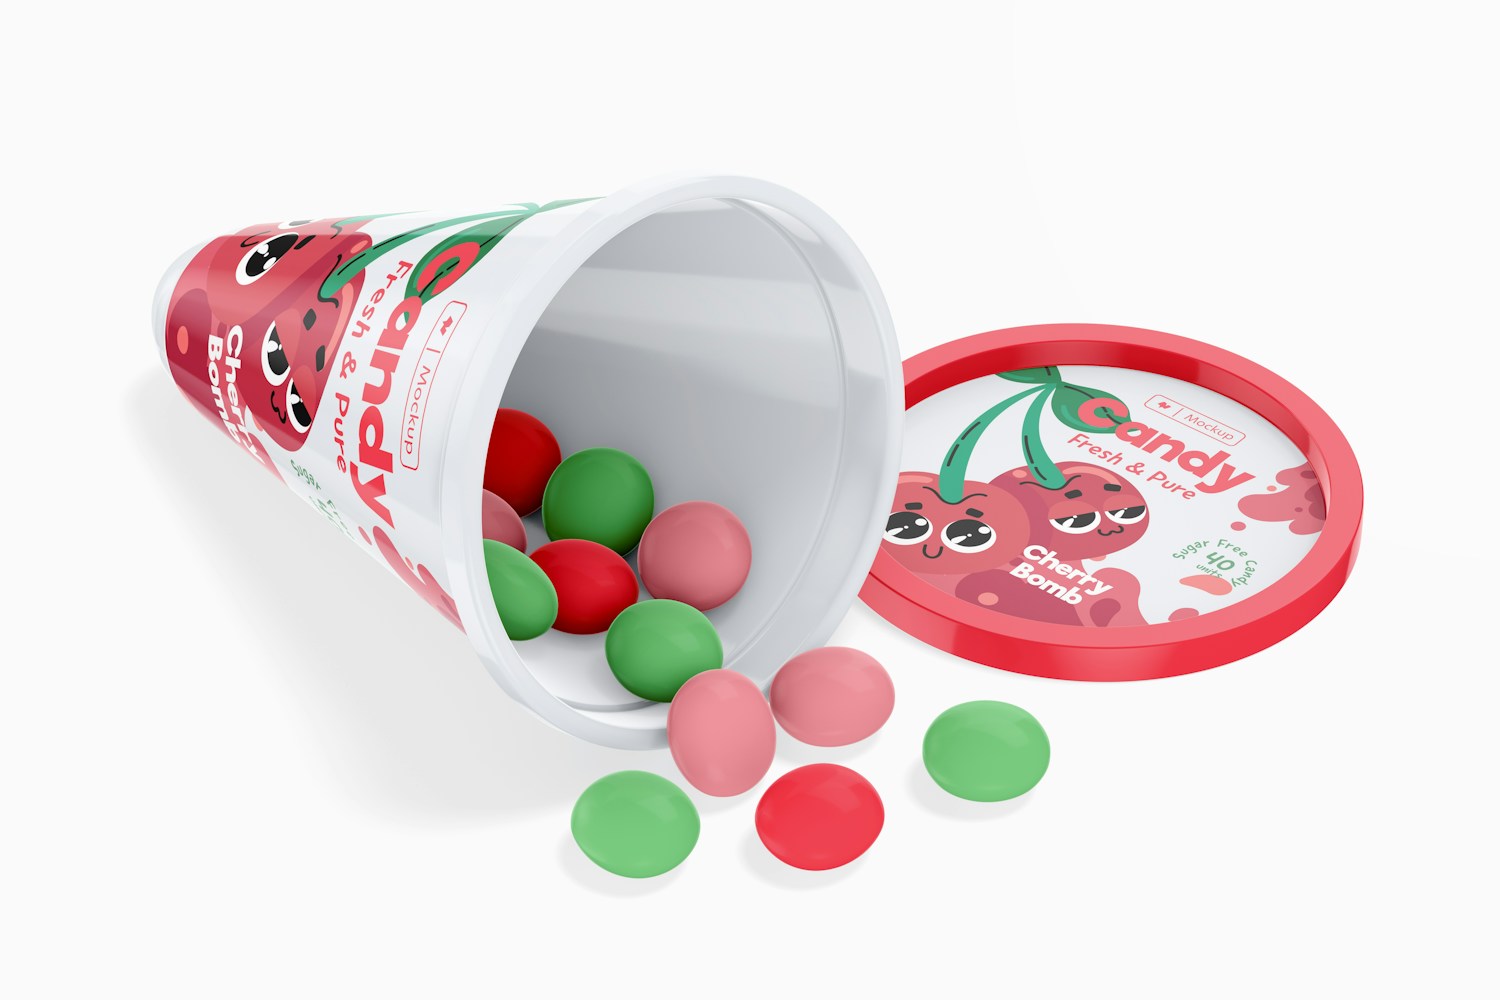 Pyramid Candy Packaging Mockup, Opened